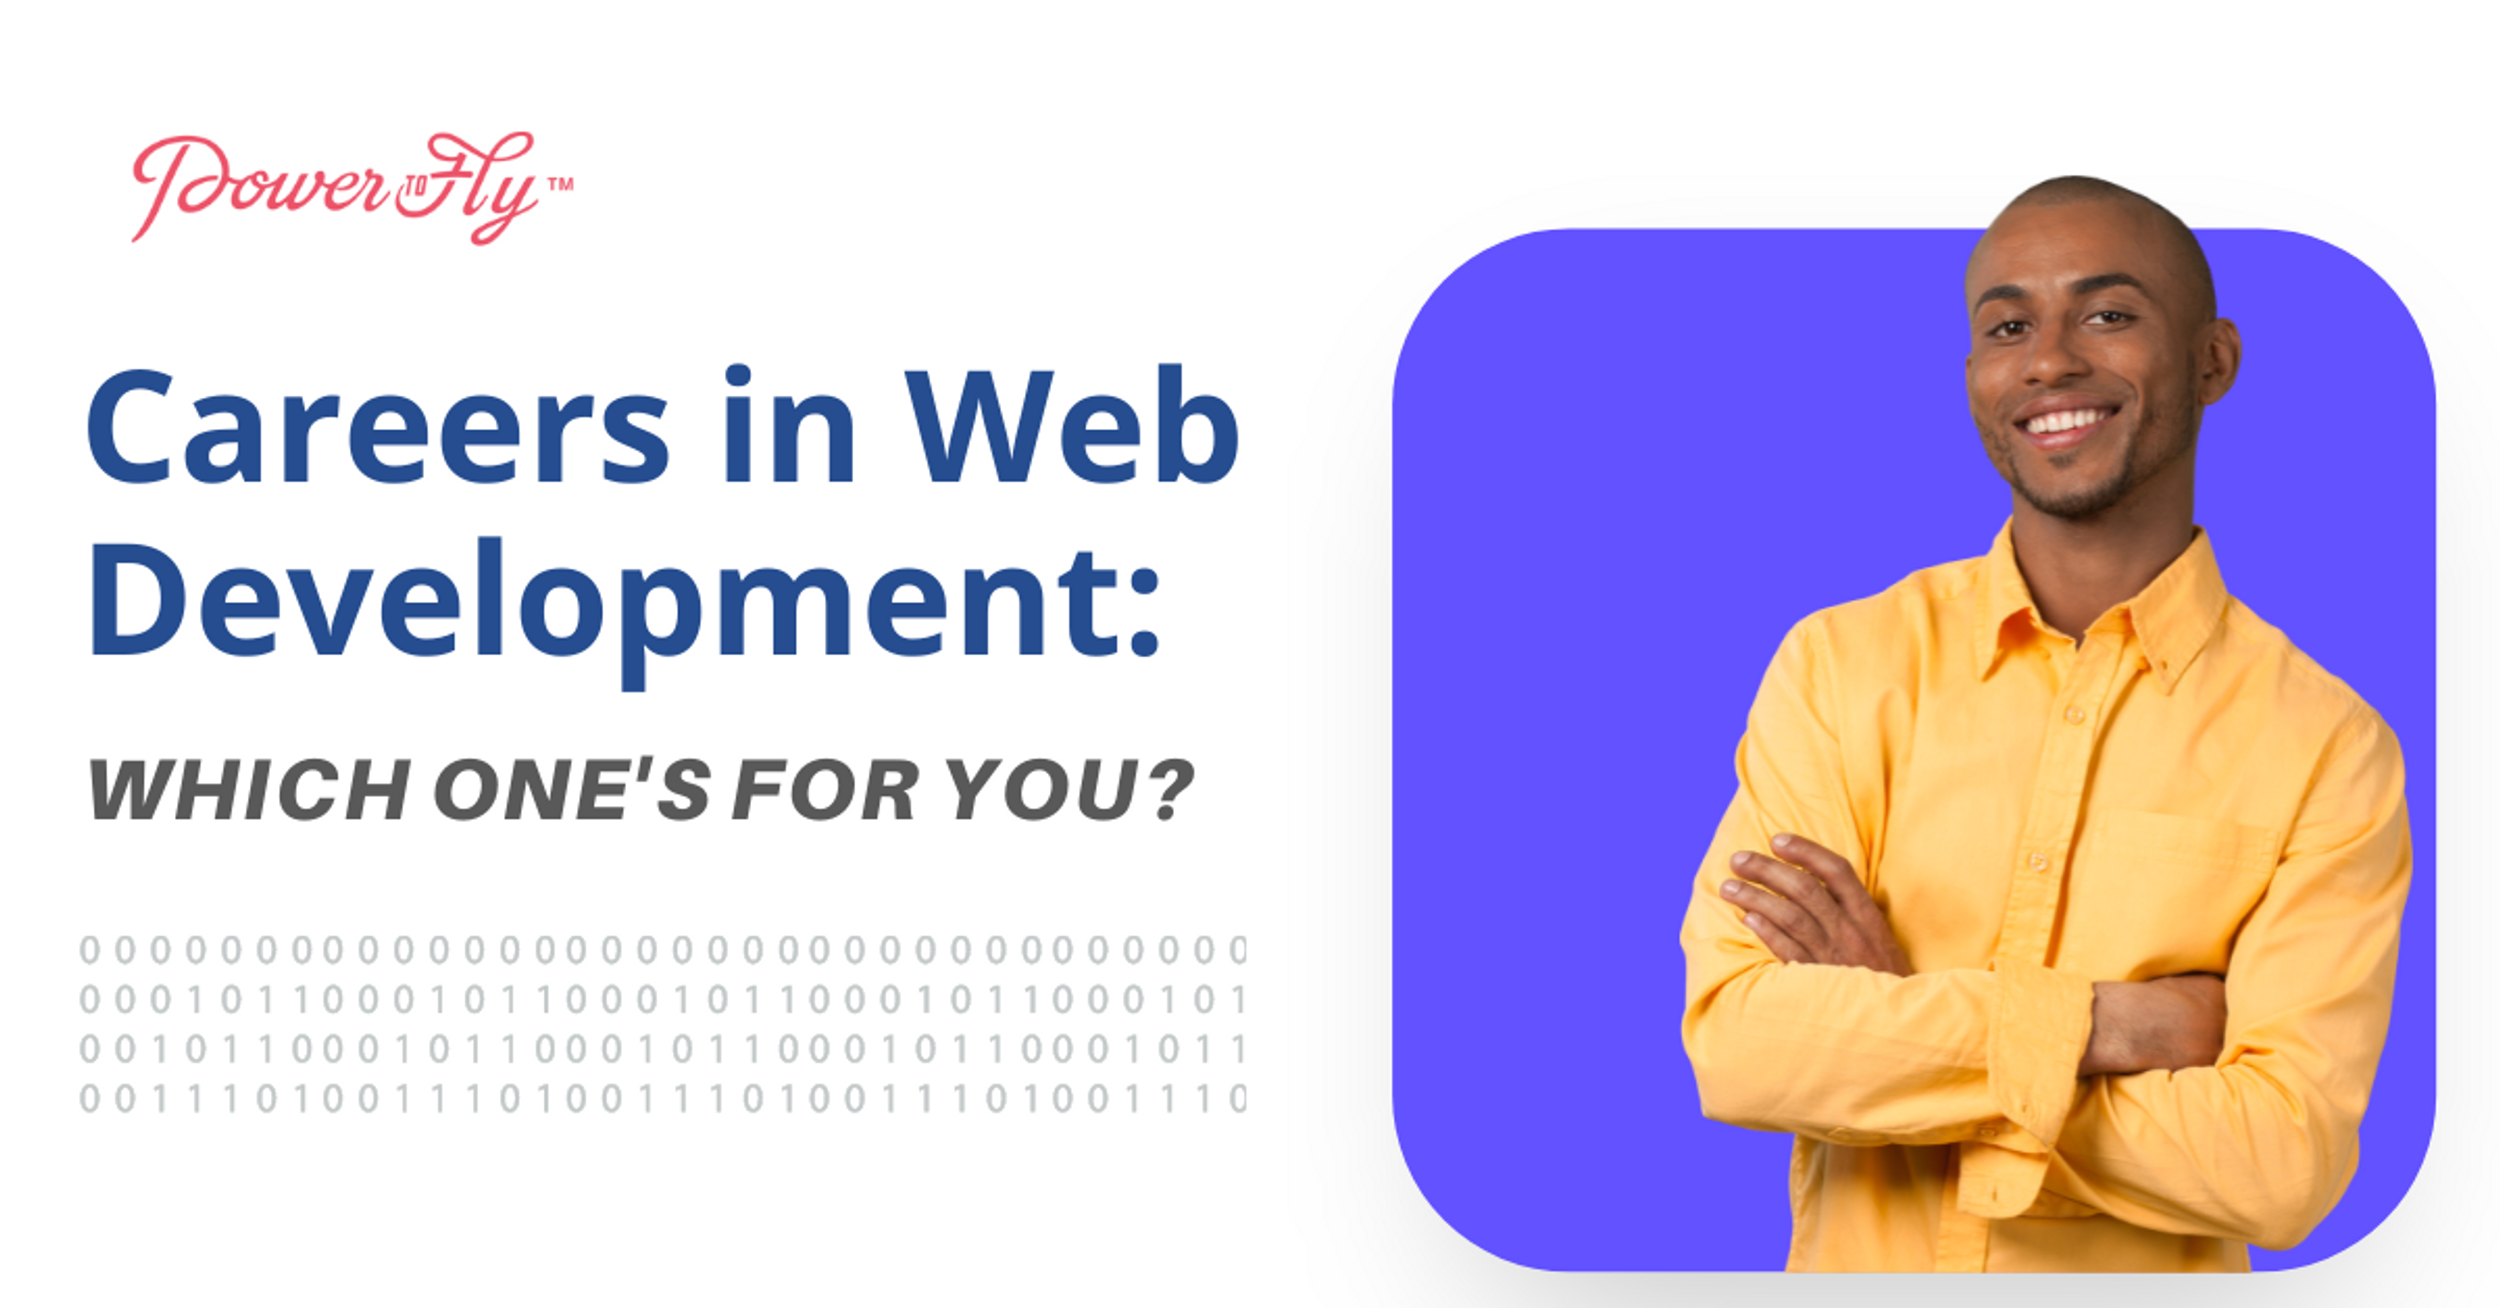 Careers in Web Development: Which One is For You?